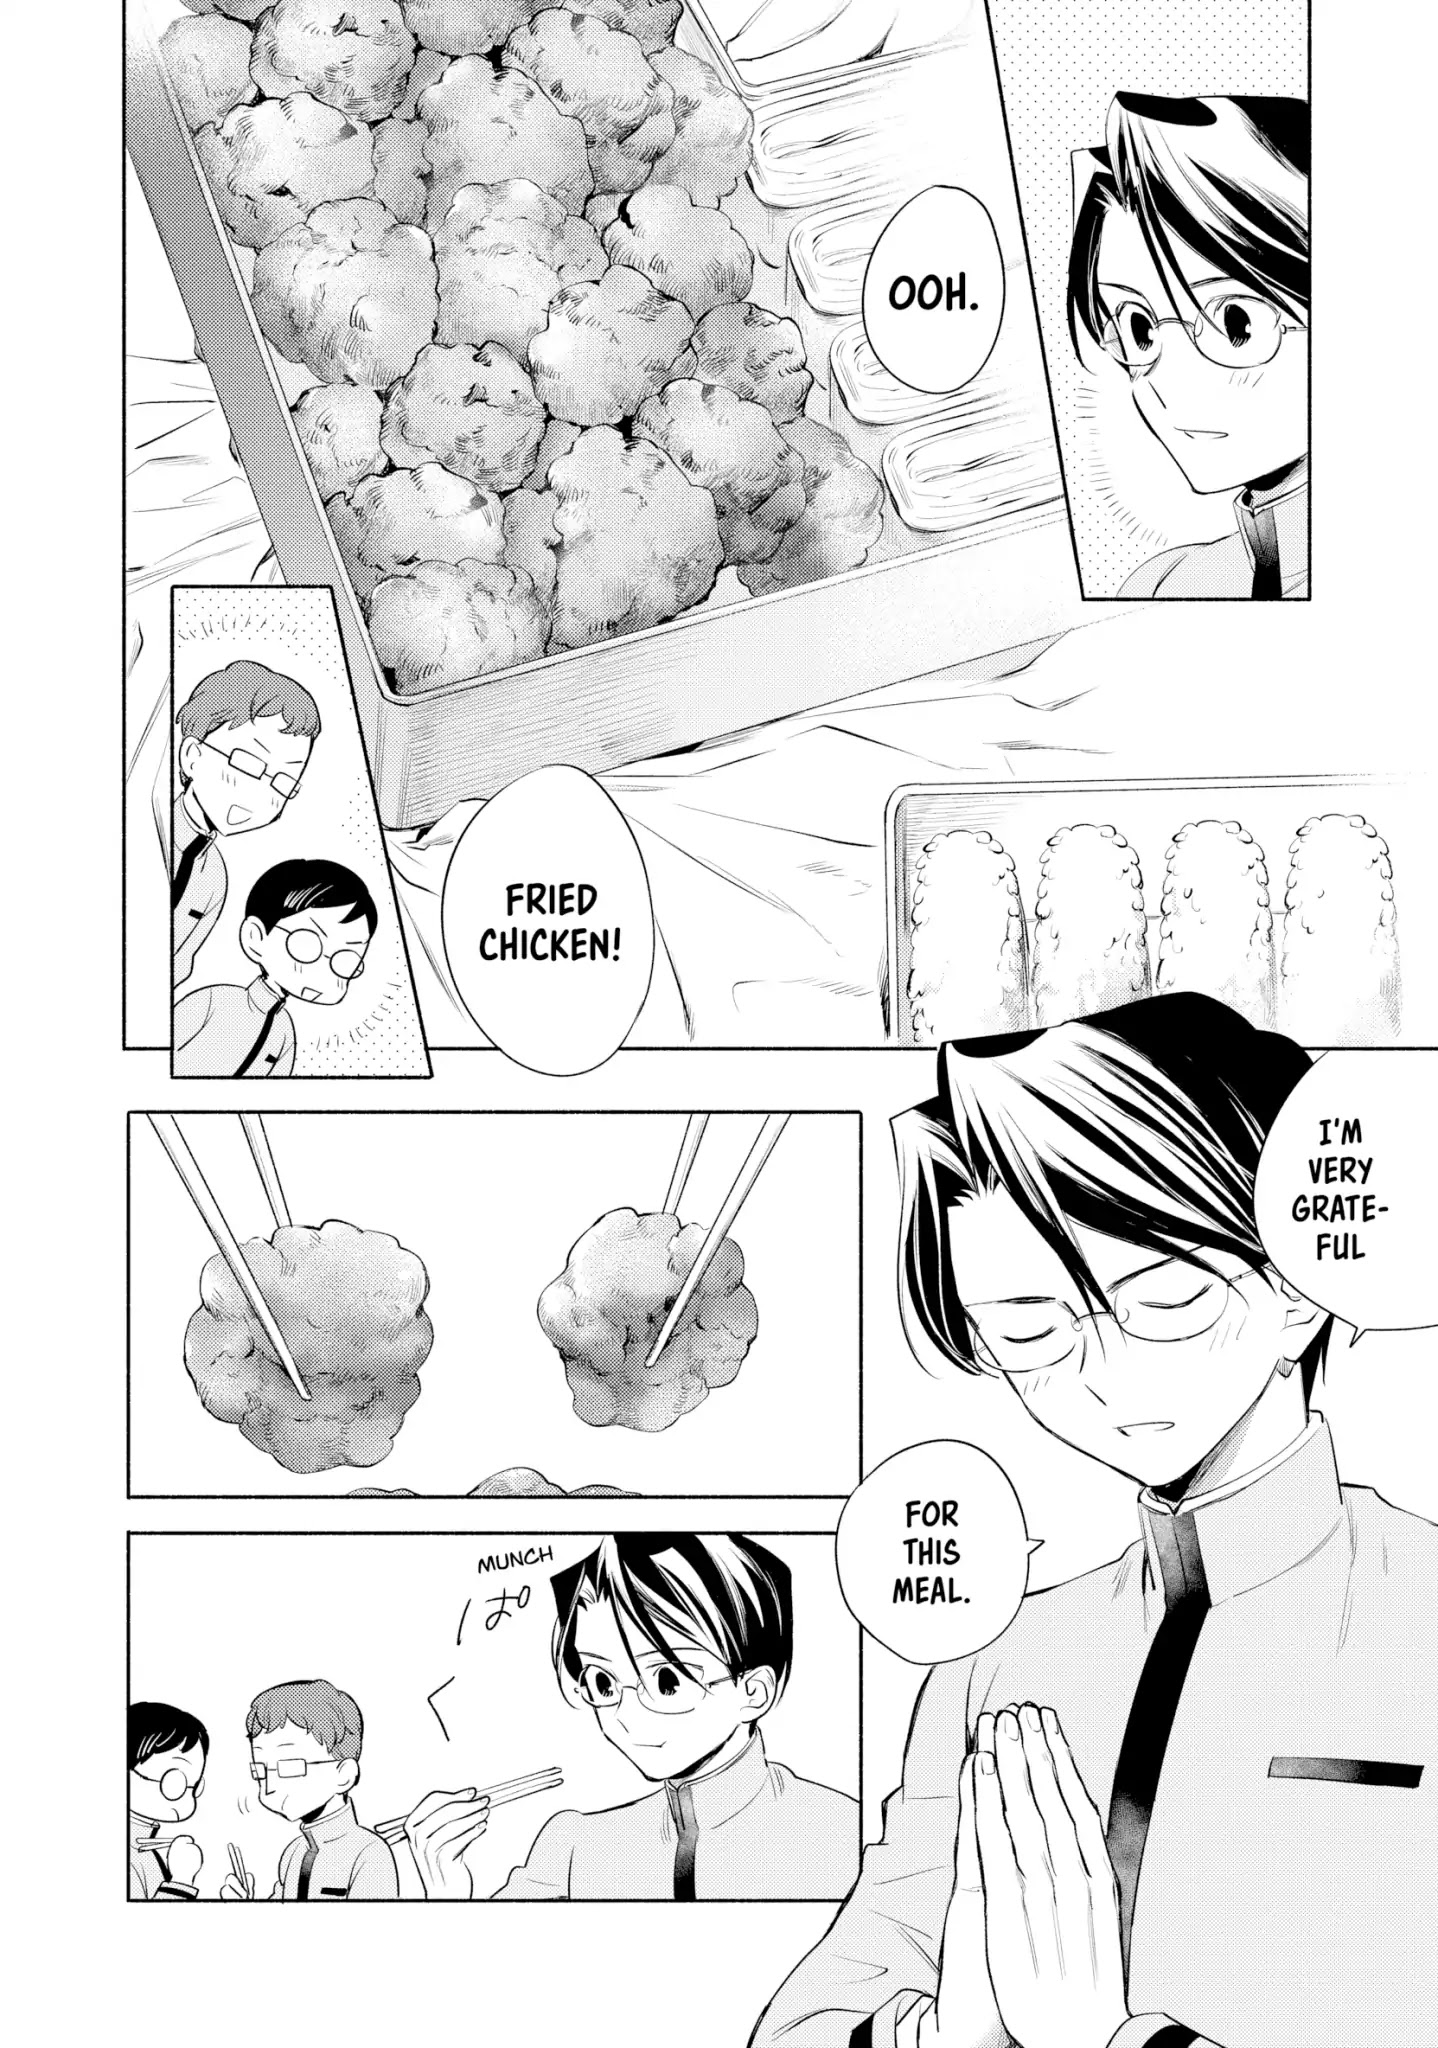 What's Cooking at the Emiya House Today? Chapter 10: Fried Chicken that Tastes Good Cold